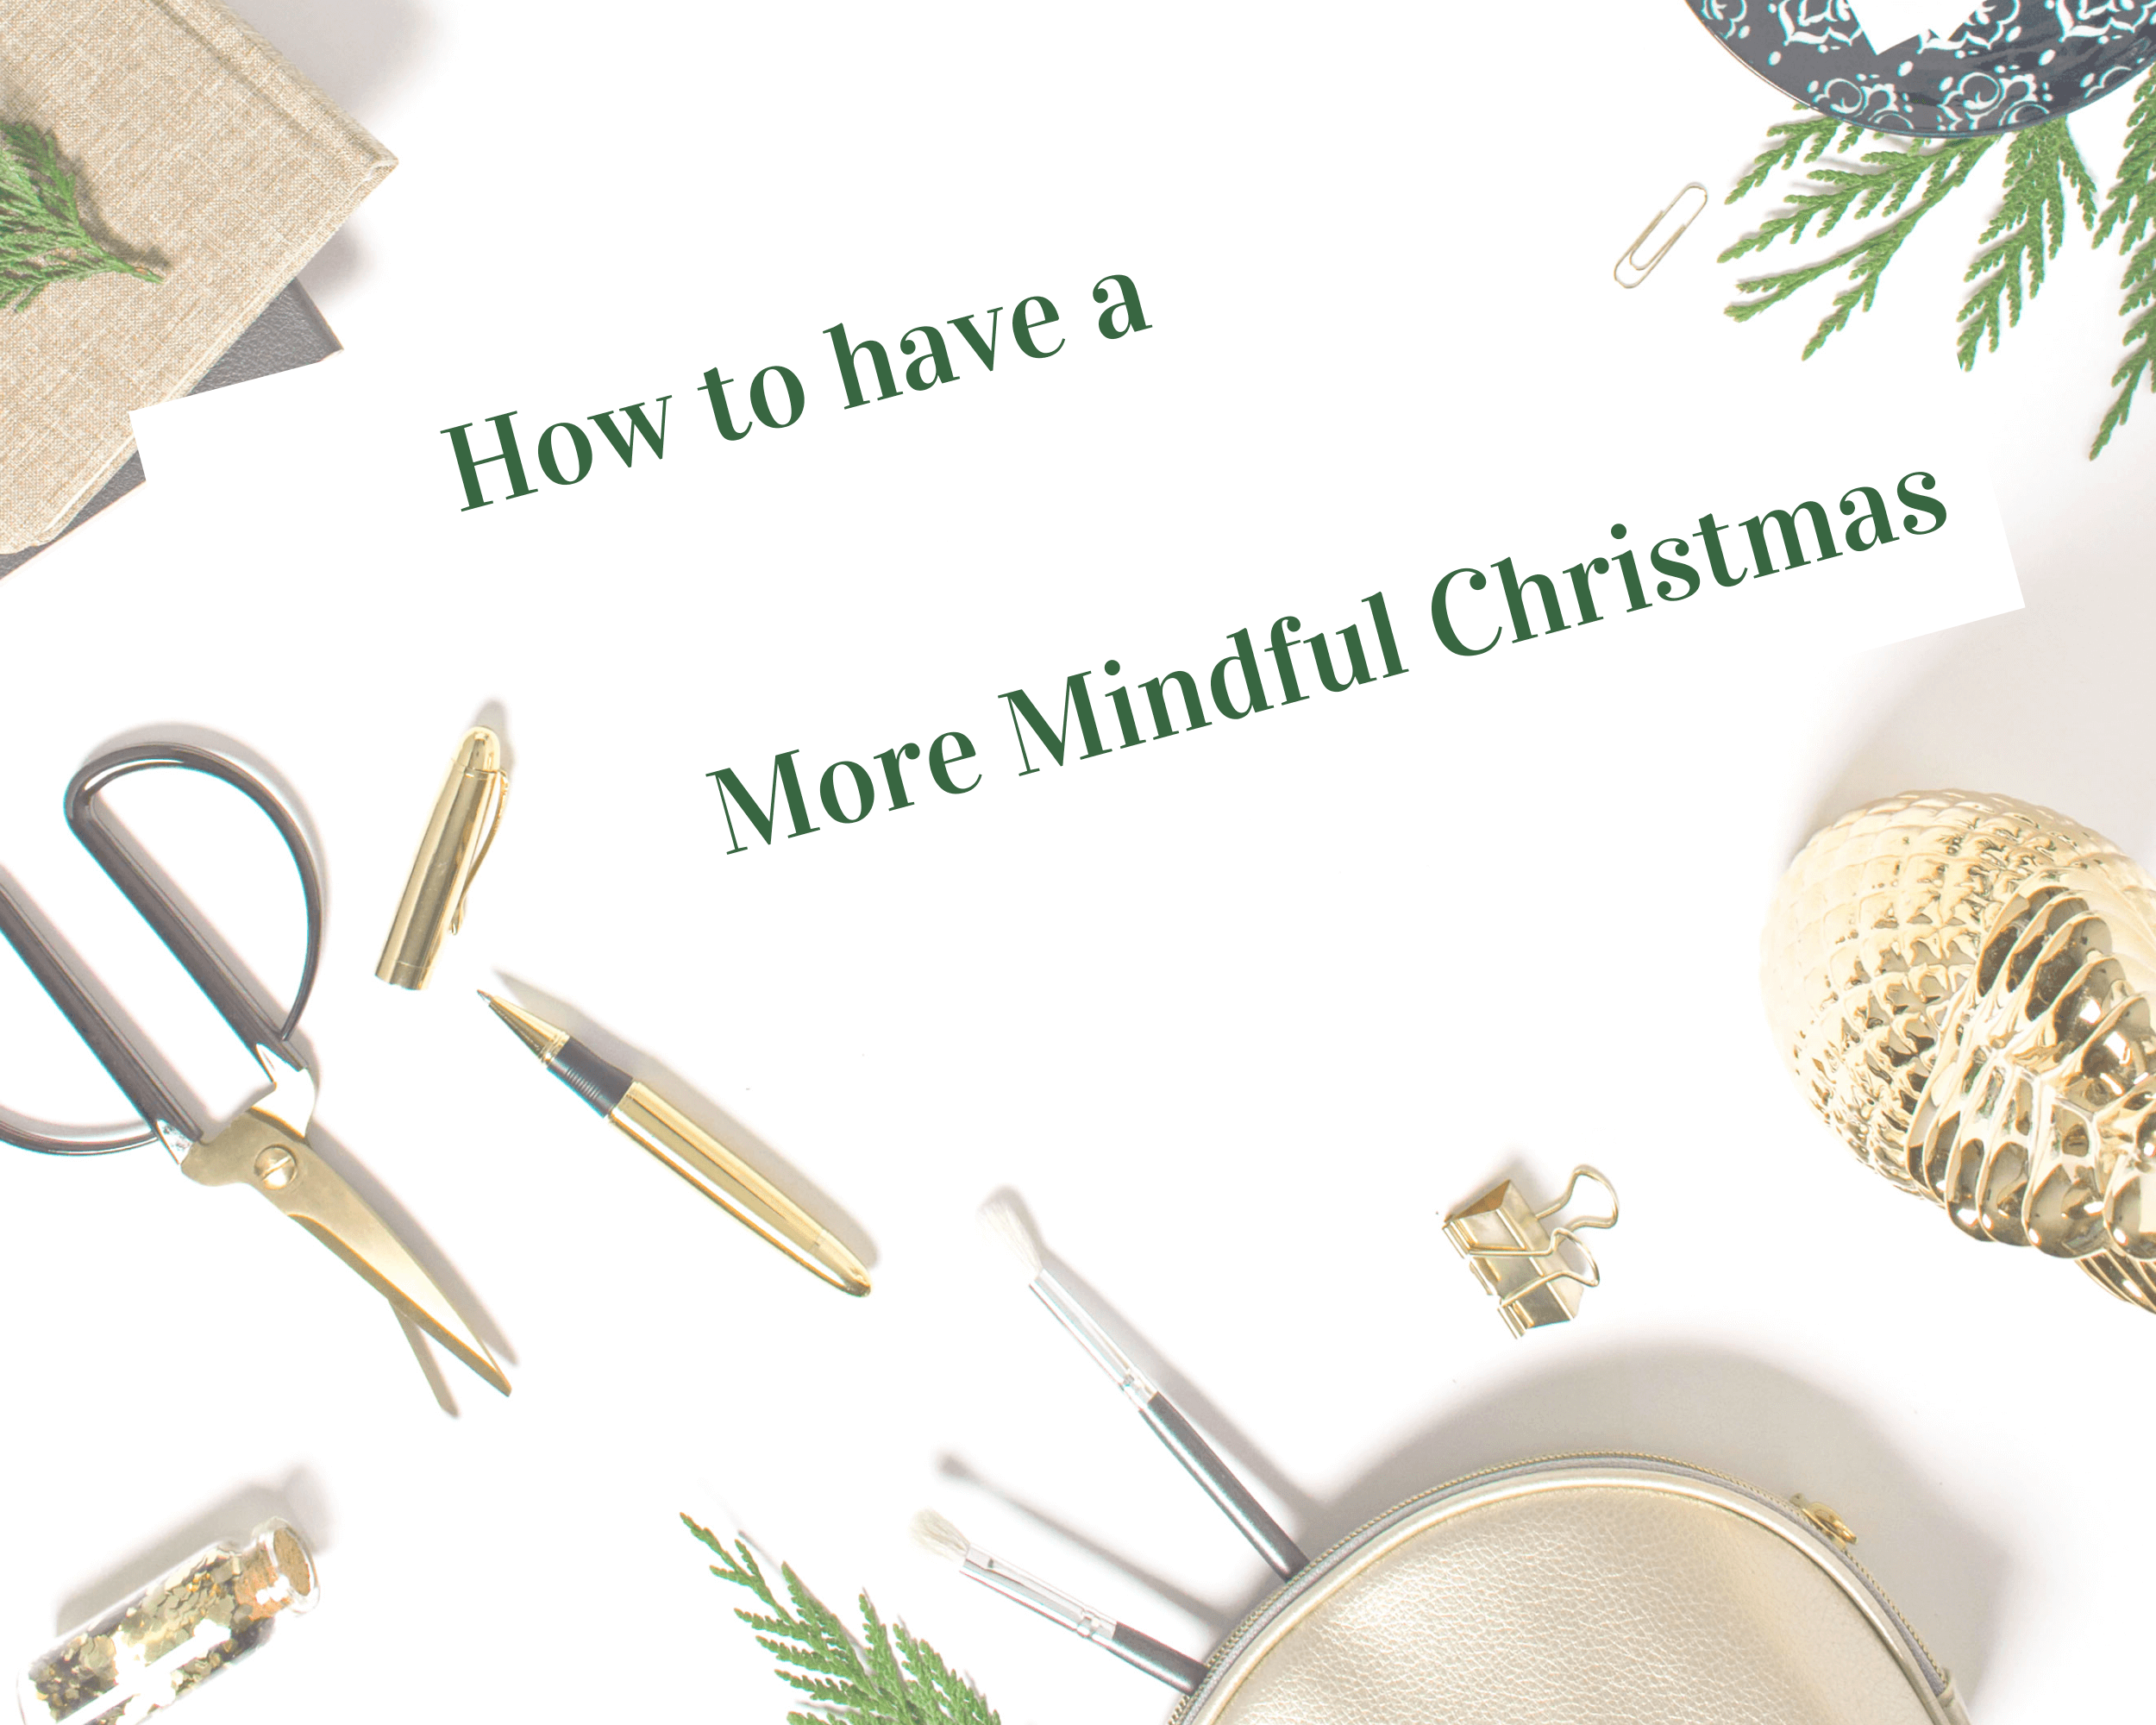 How to have a more mindful christmas